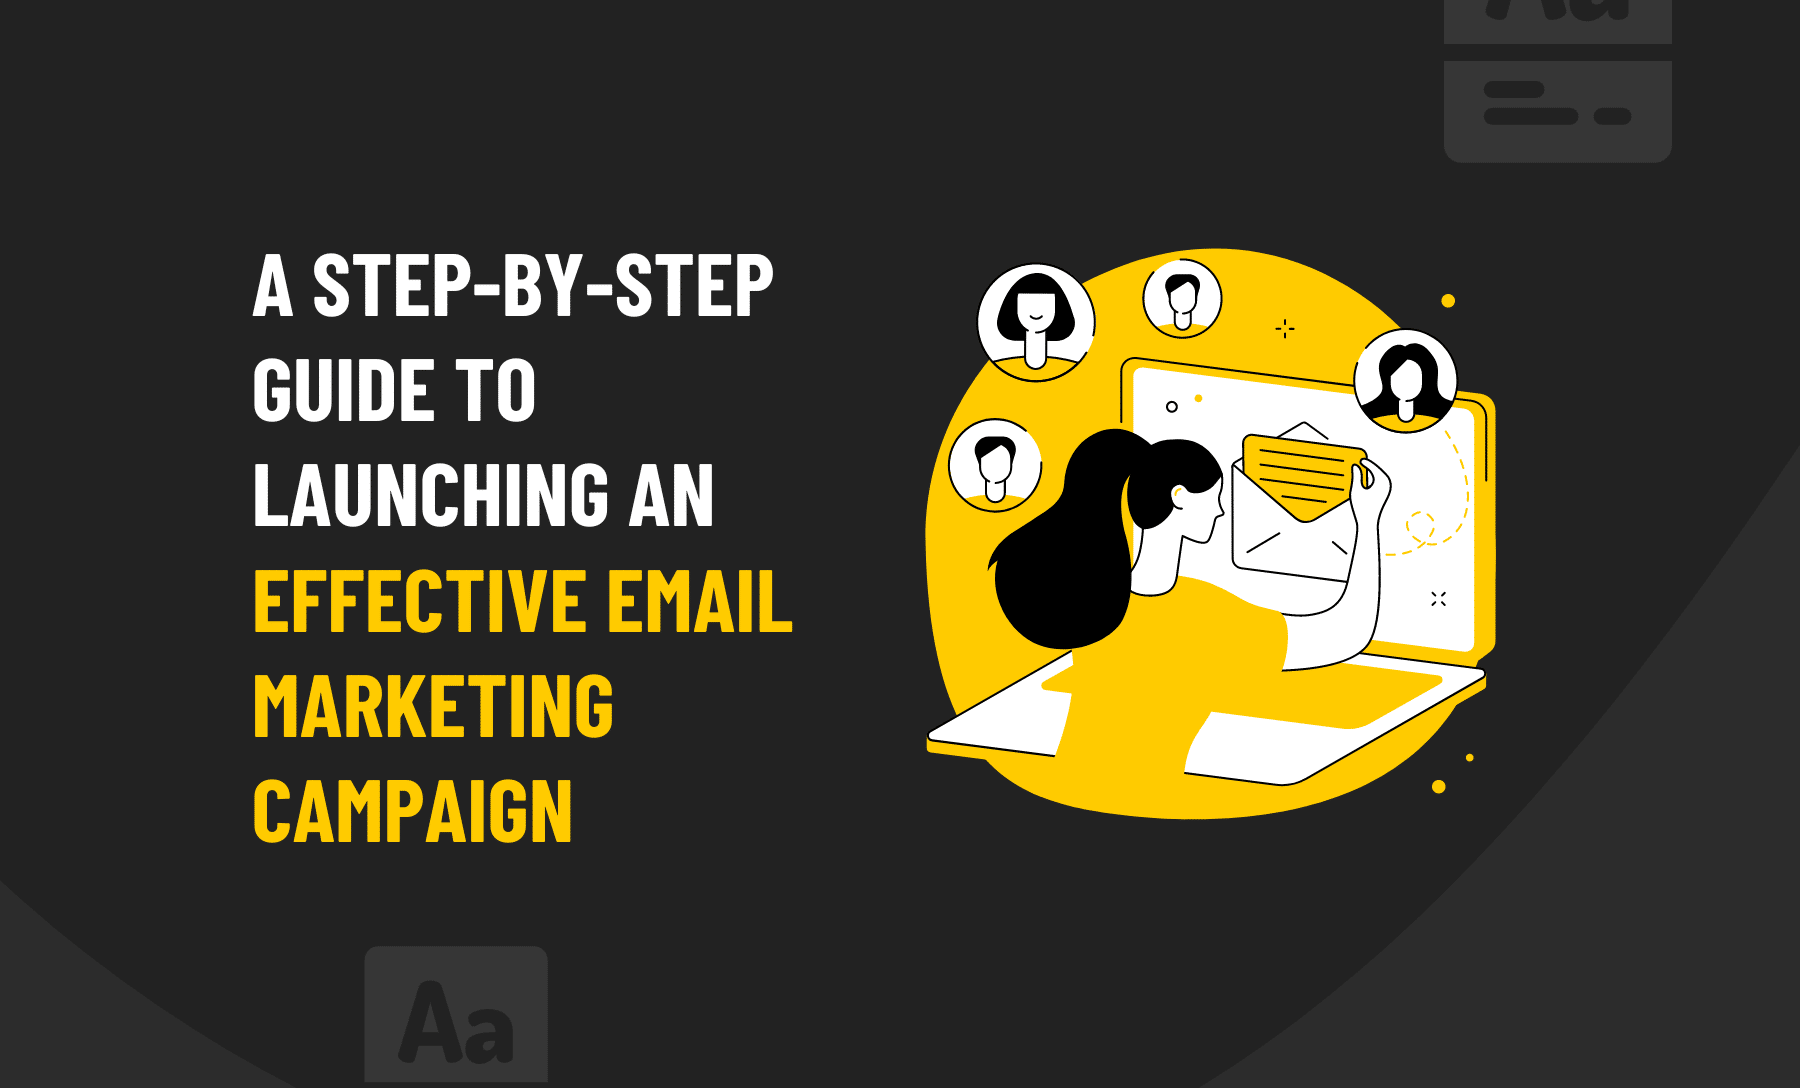 Step by step guide to launching an effective email marketing campaign